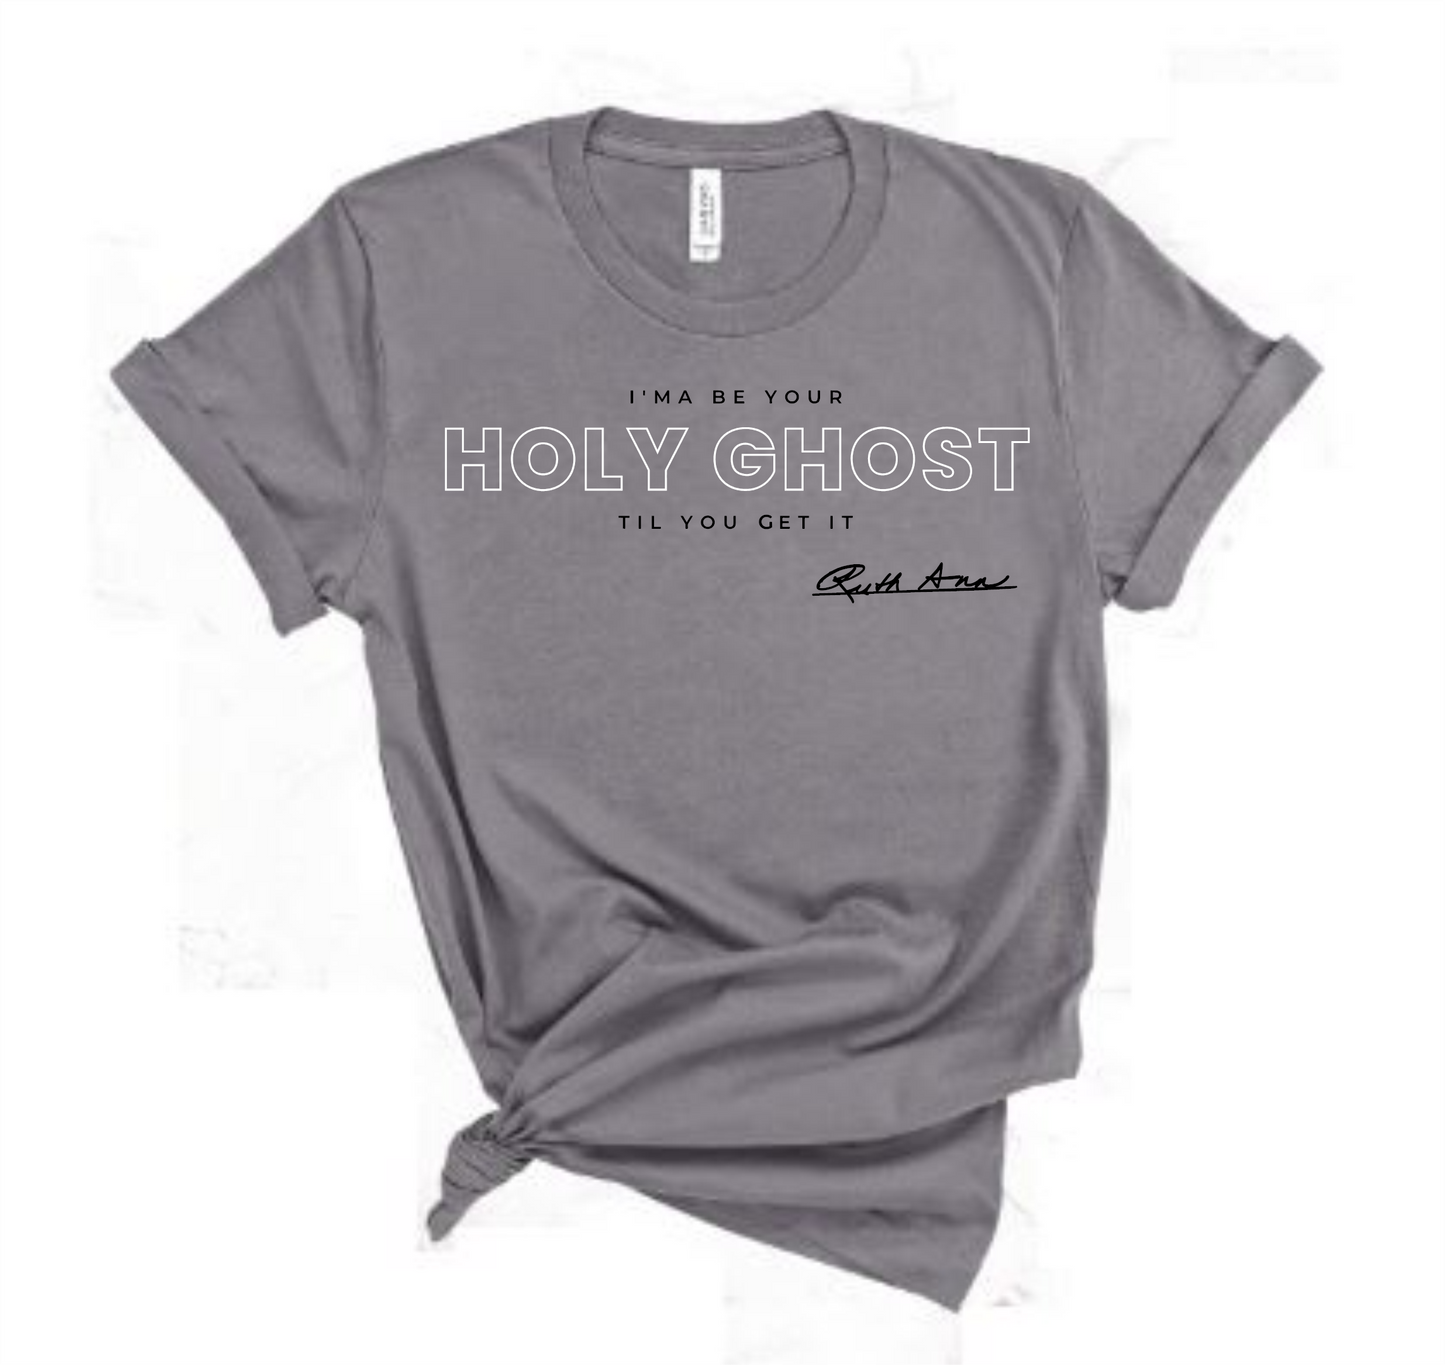 "MAMA SAID" - I'MA BE YOUR HOLY GHOST TIL YOU GET IT - DESIGN 5